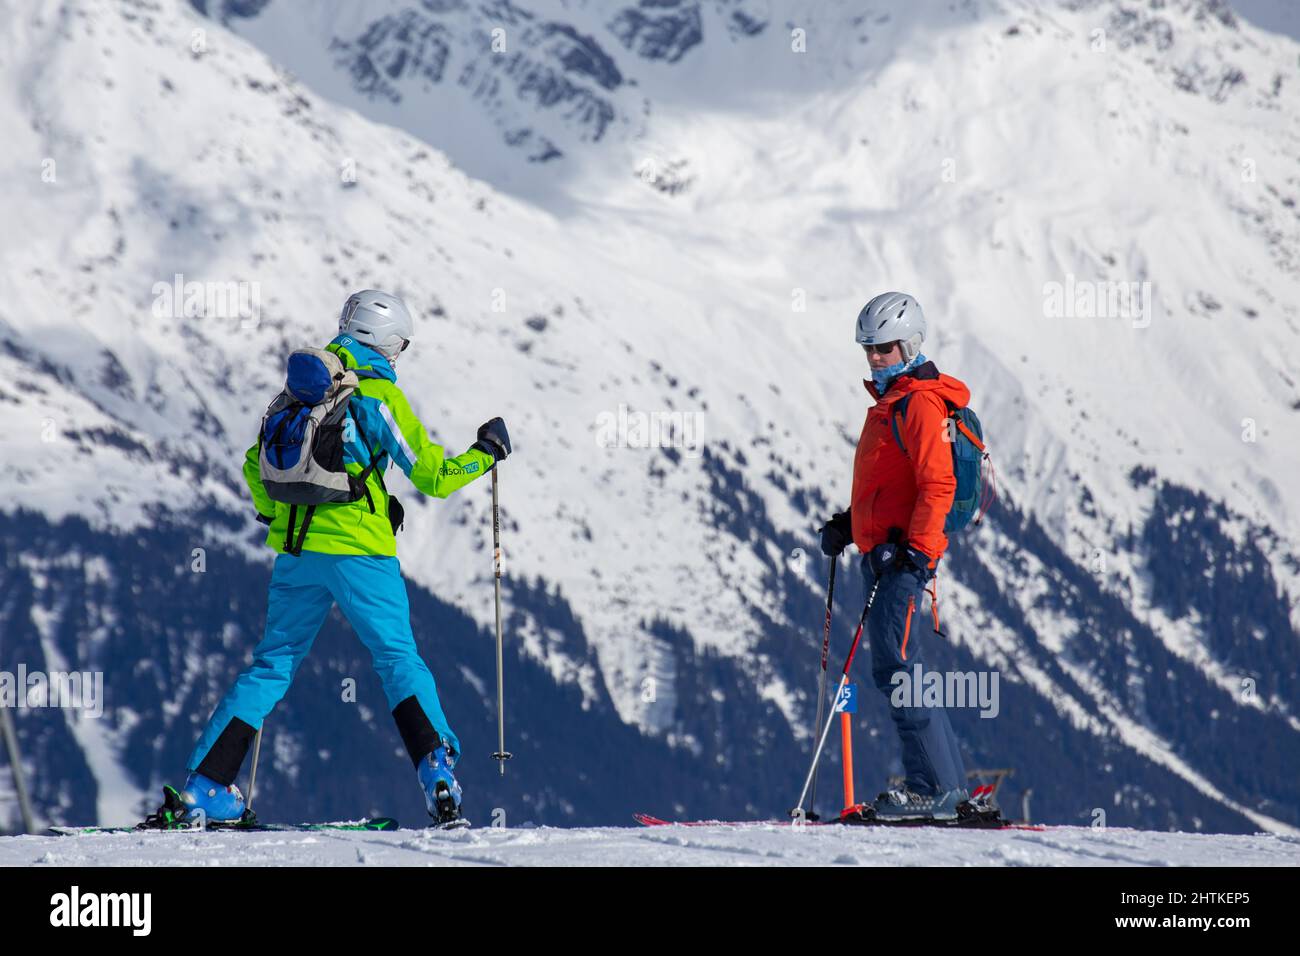 Parsenn ski resort, Davos: Two skiers just before the next descent Stock Photo